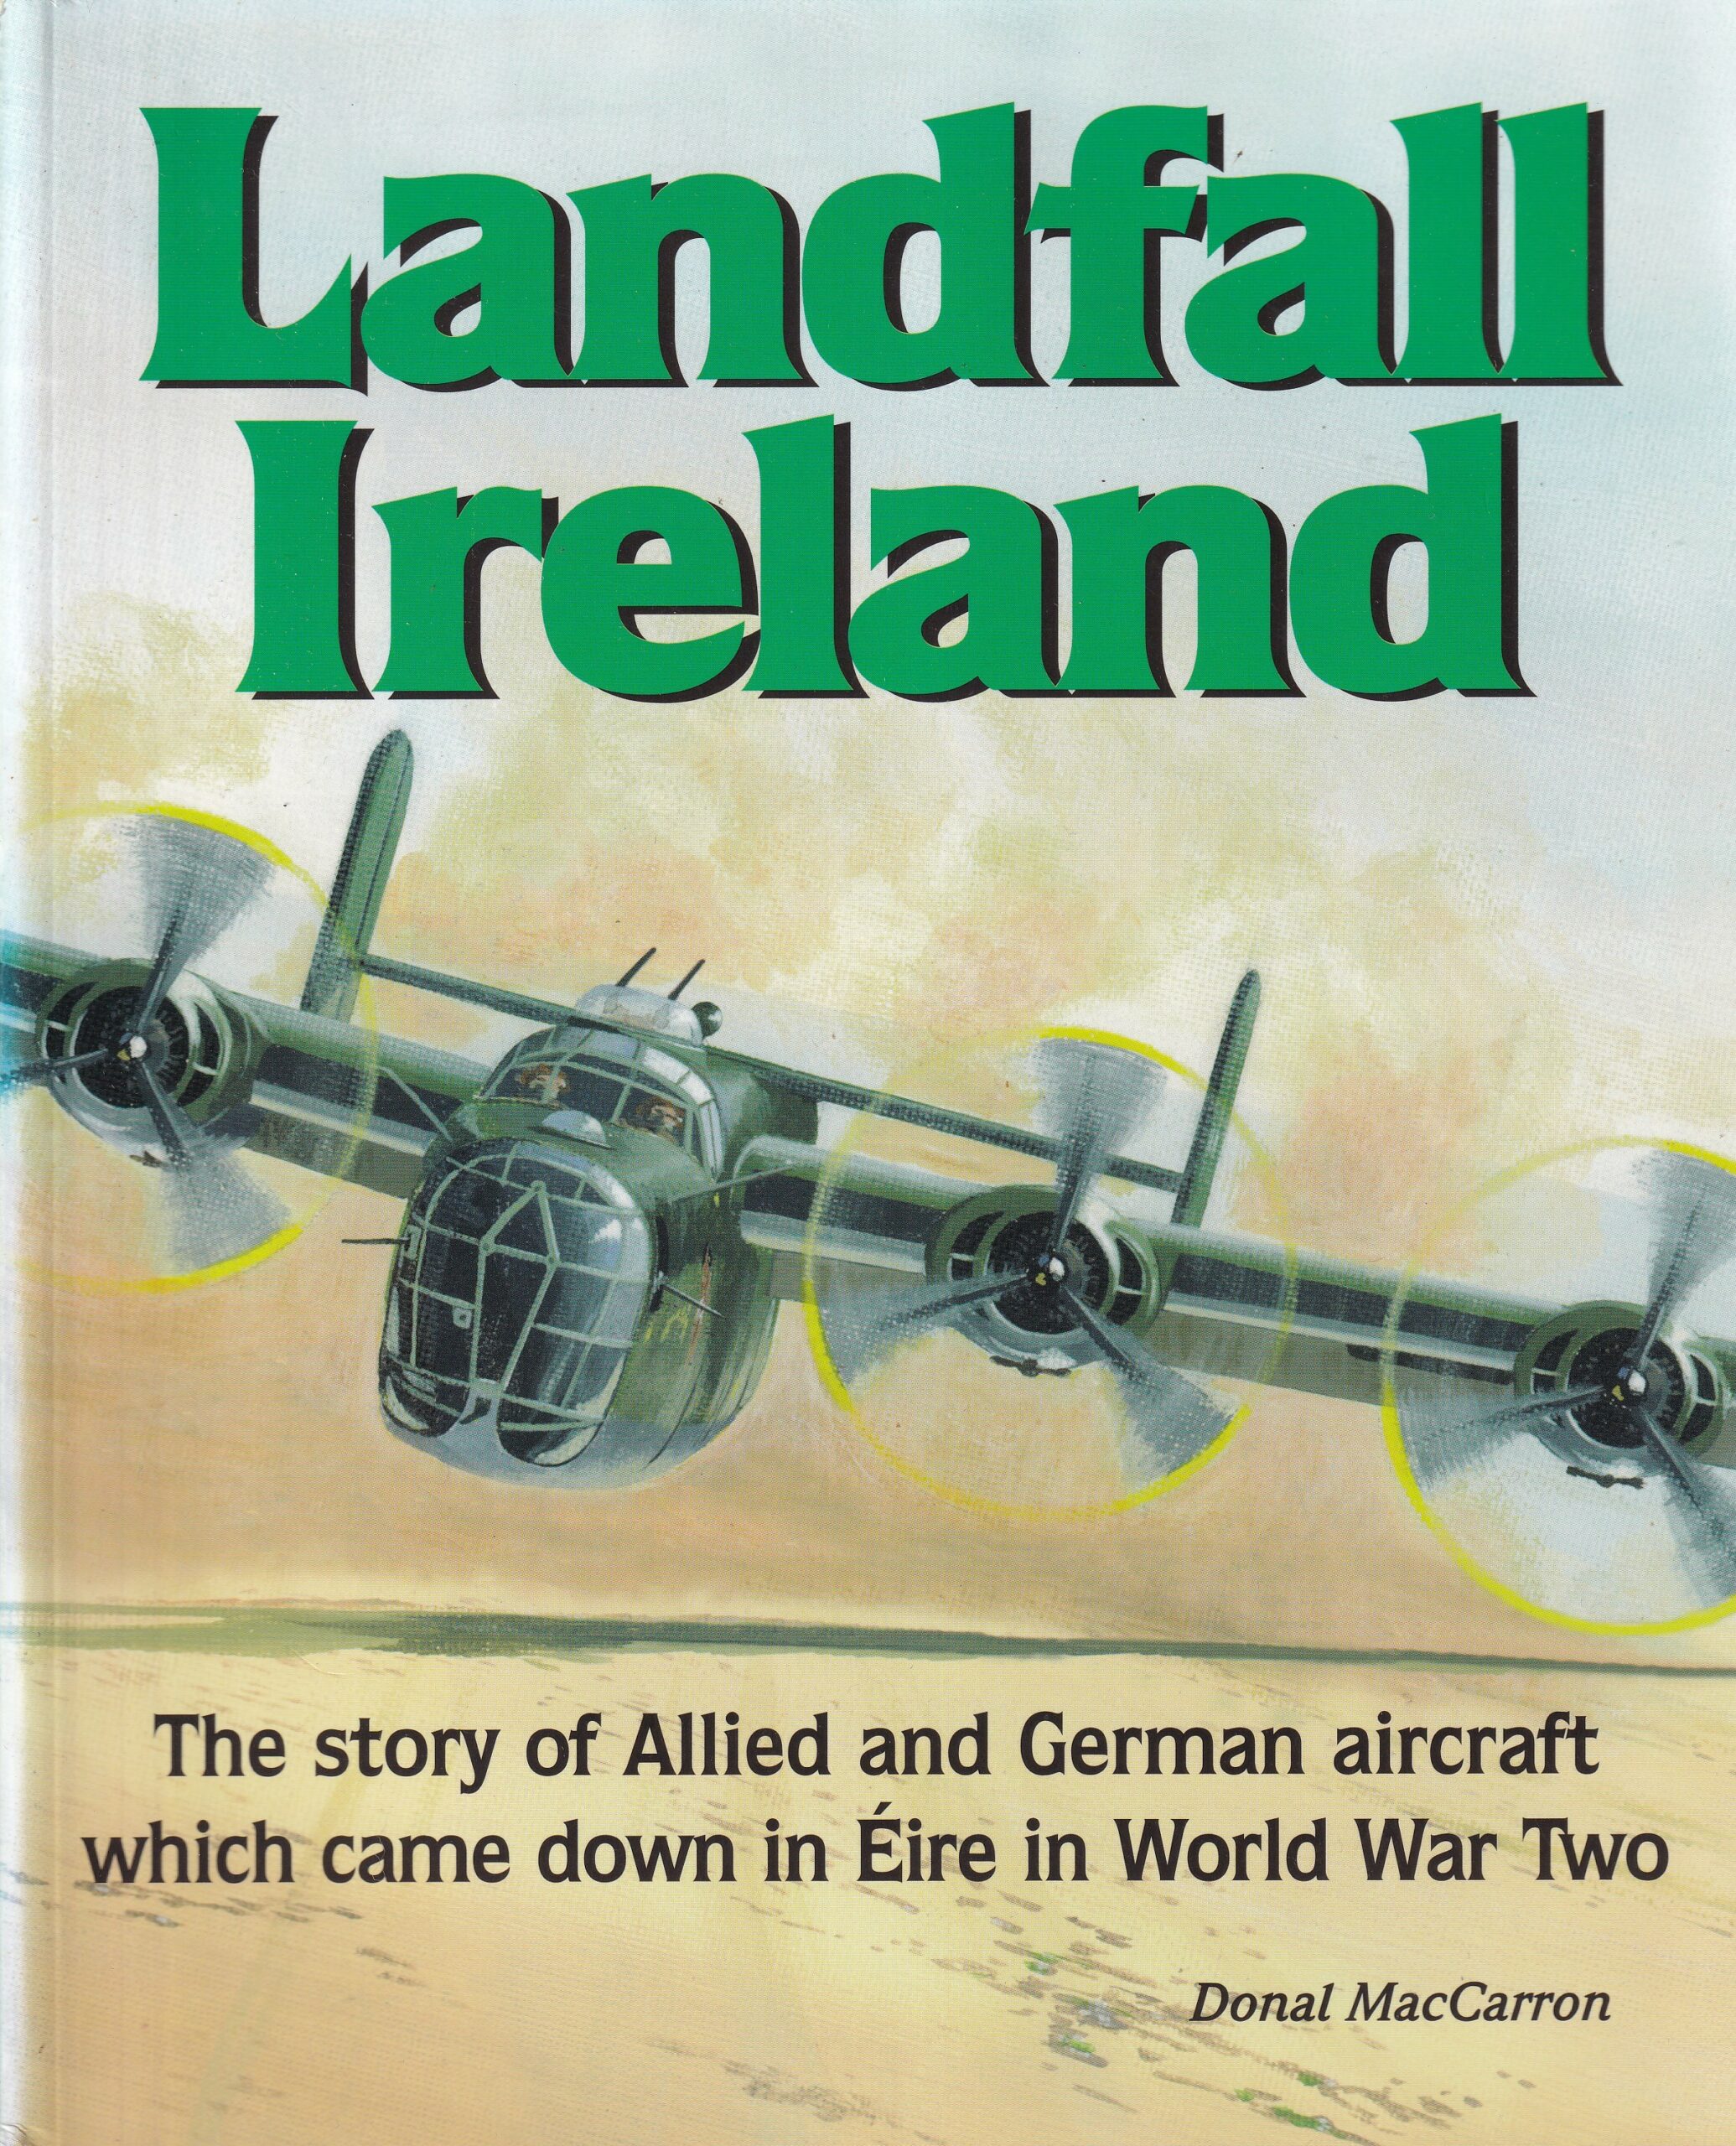 Landfall Ireland: The Story of Allied and German Aircraft Which Came Down in Éire in World War Two by Donal MacCarron